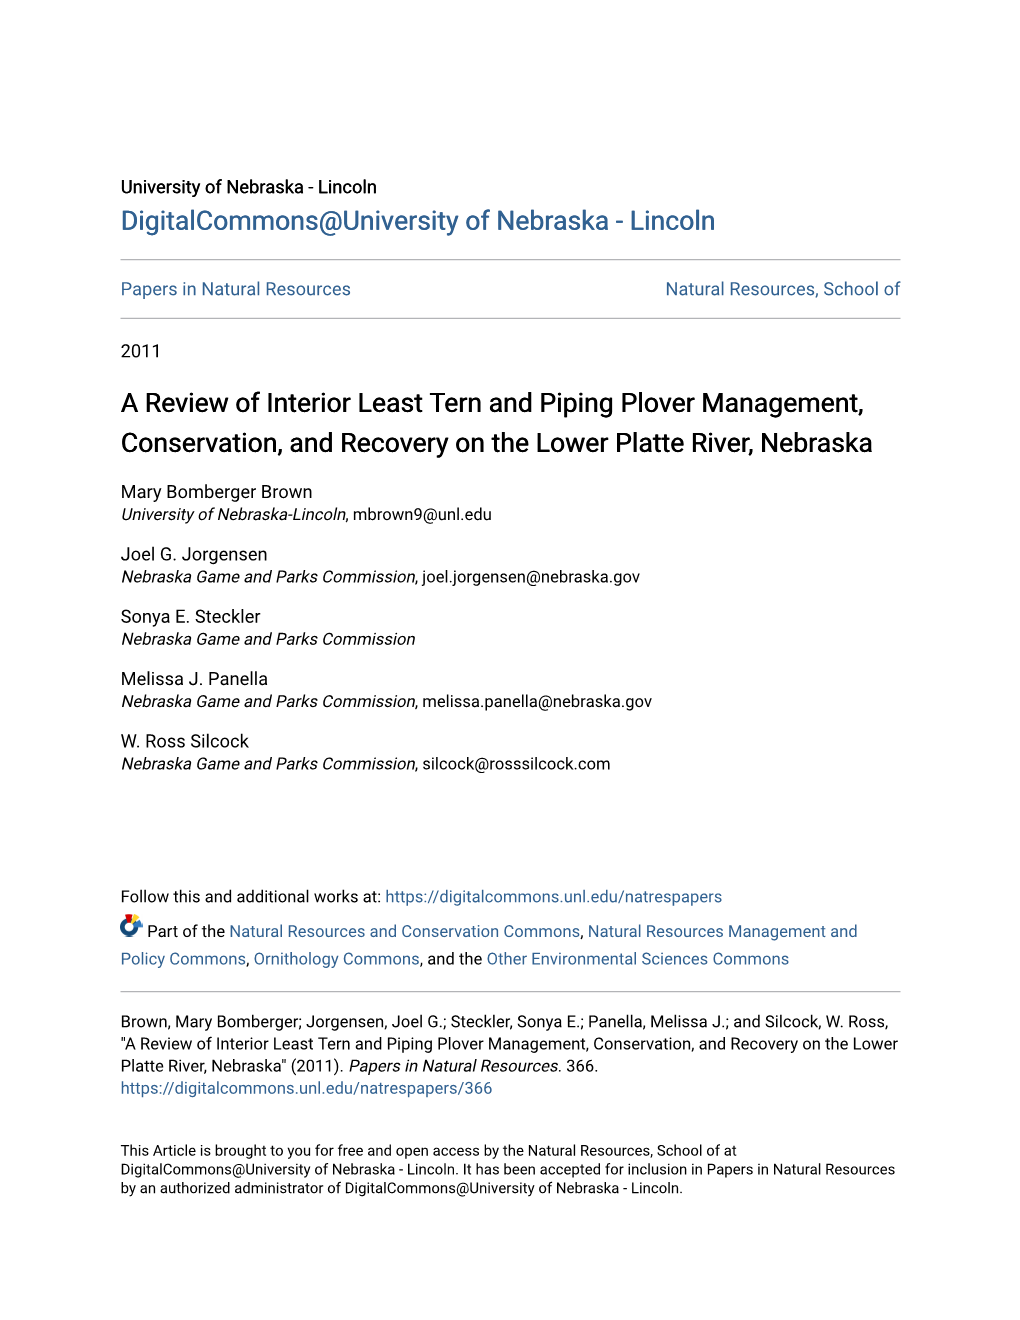 A Review of Interior Least Tern and Piping Plover Management, Conservation, and Recovery on the Lower Platte River, Nebraska